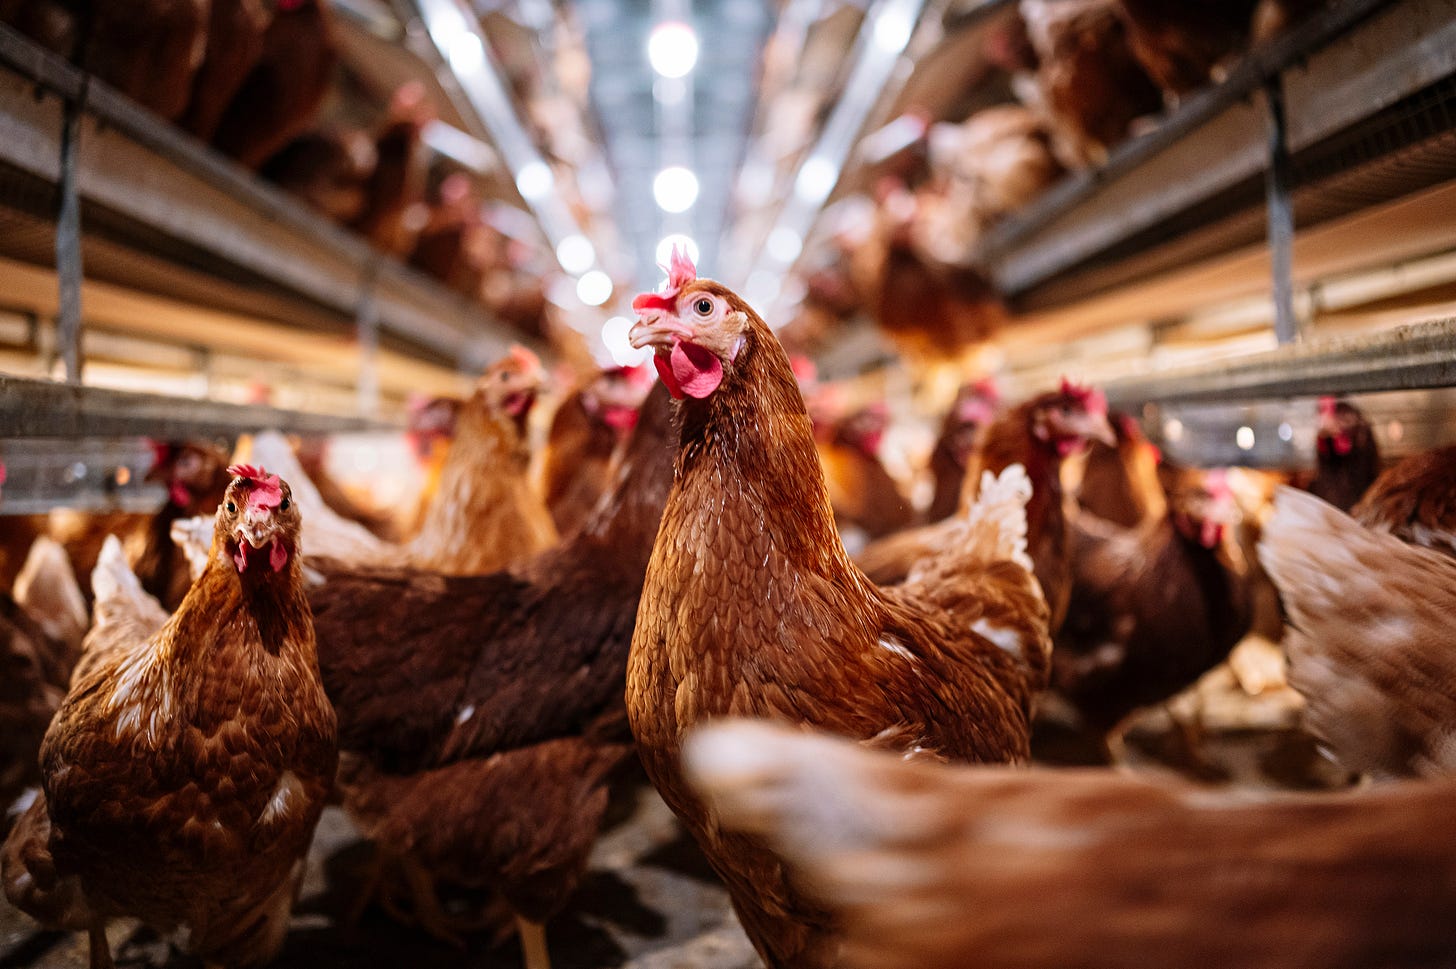 Bird flu outbreak in the US: Human risk remains low, CDC says